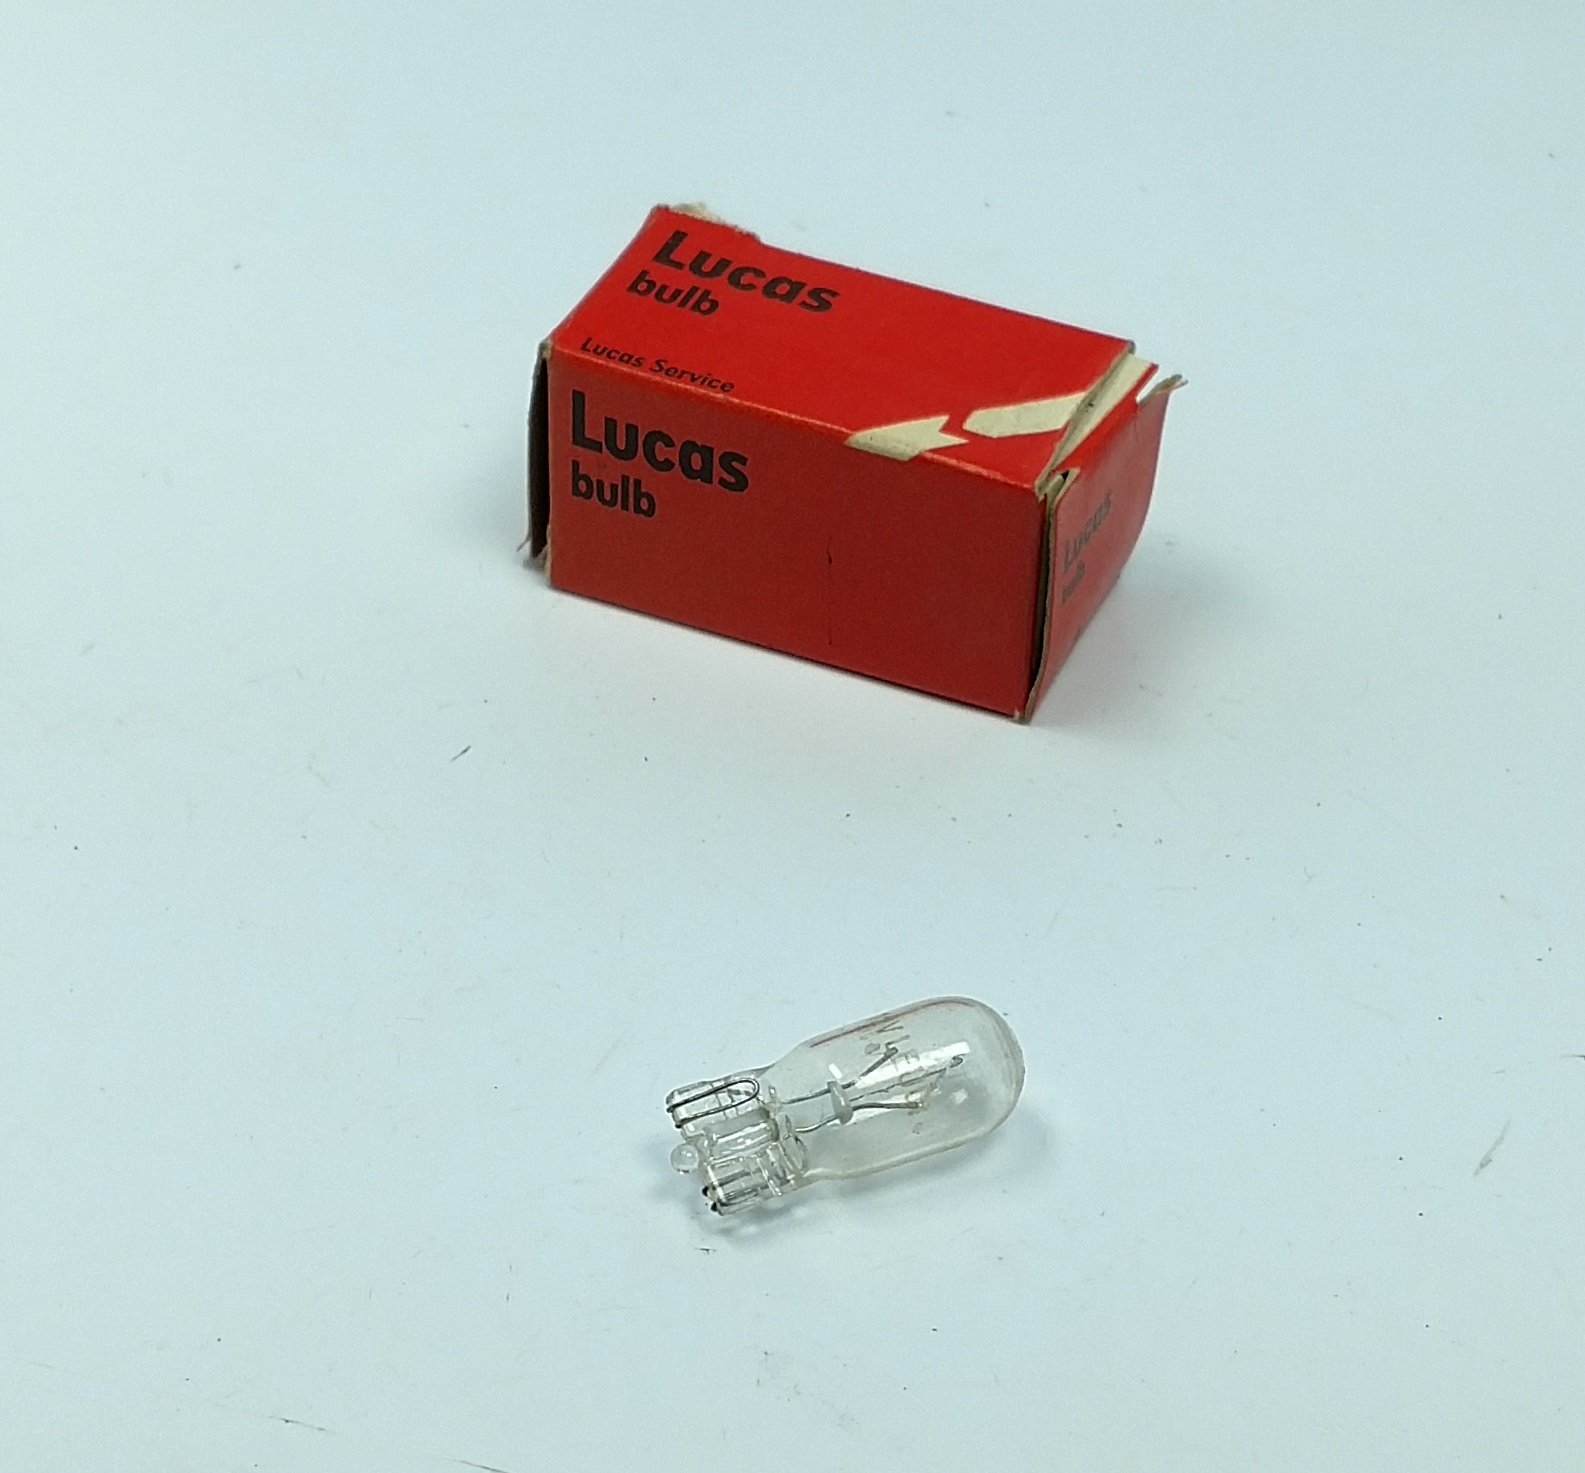 REPLACEMENT BULBS FOR LUCAS 281 2W 12V 10 